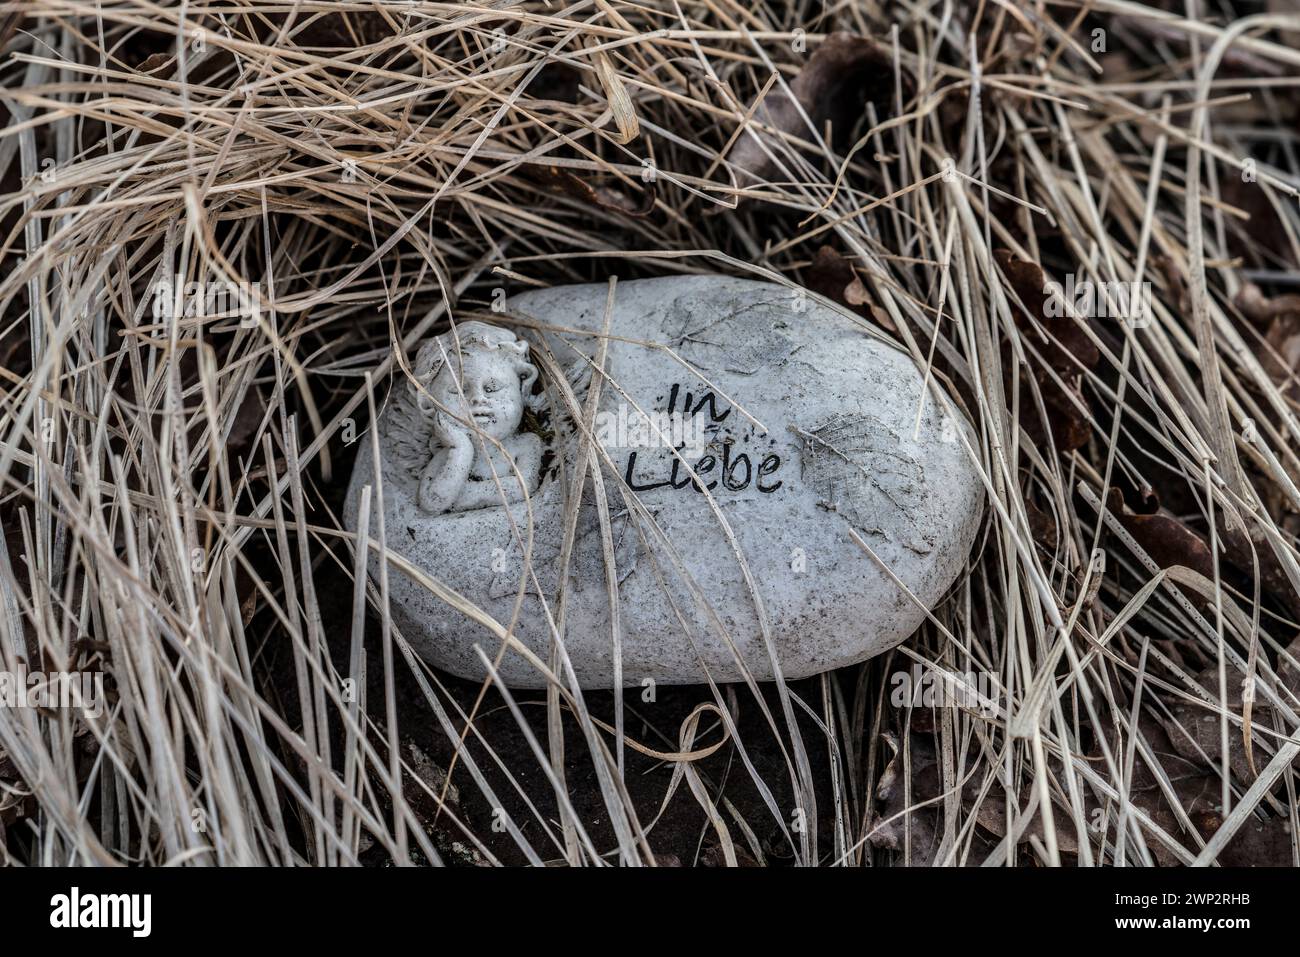 A heart with the inscription 'in love', natural burial grave site, Friedwald, Reinhardswald Forest, Weser Uplands, district of Kassel, Hesse, Germany, Stock Photo